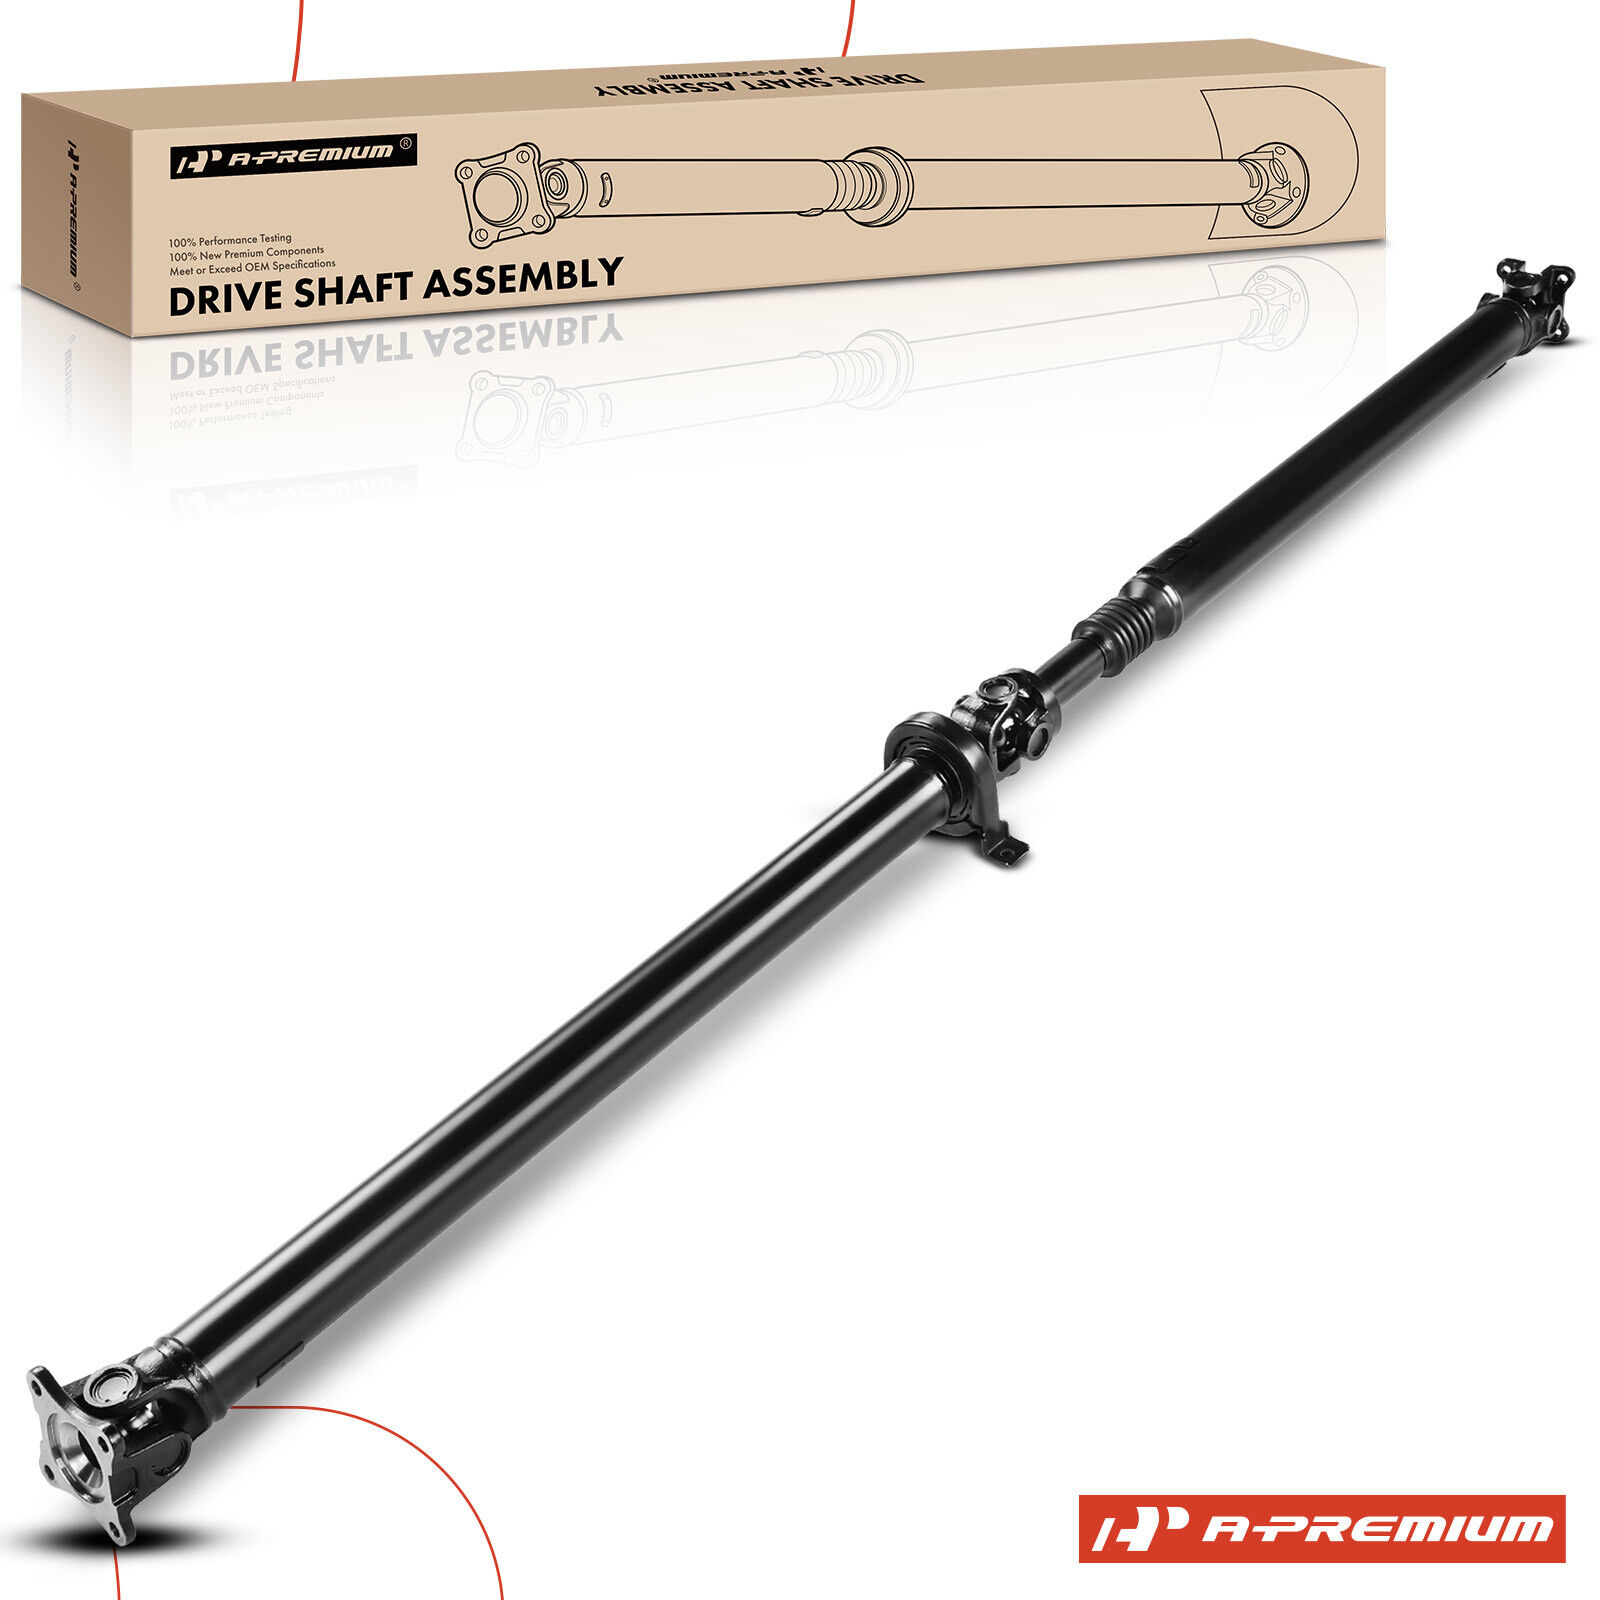 New Automatic Trans Rear Driveshaft Prop Shaft Assembly for Ford F-150009-14 RWD